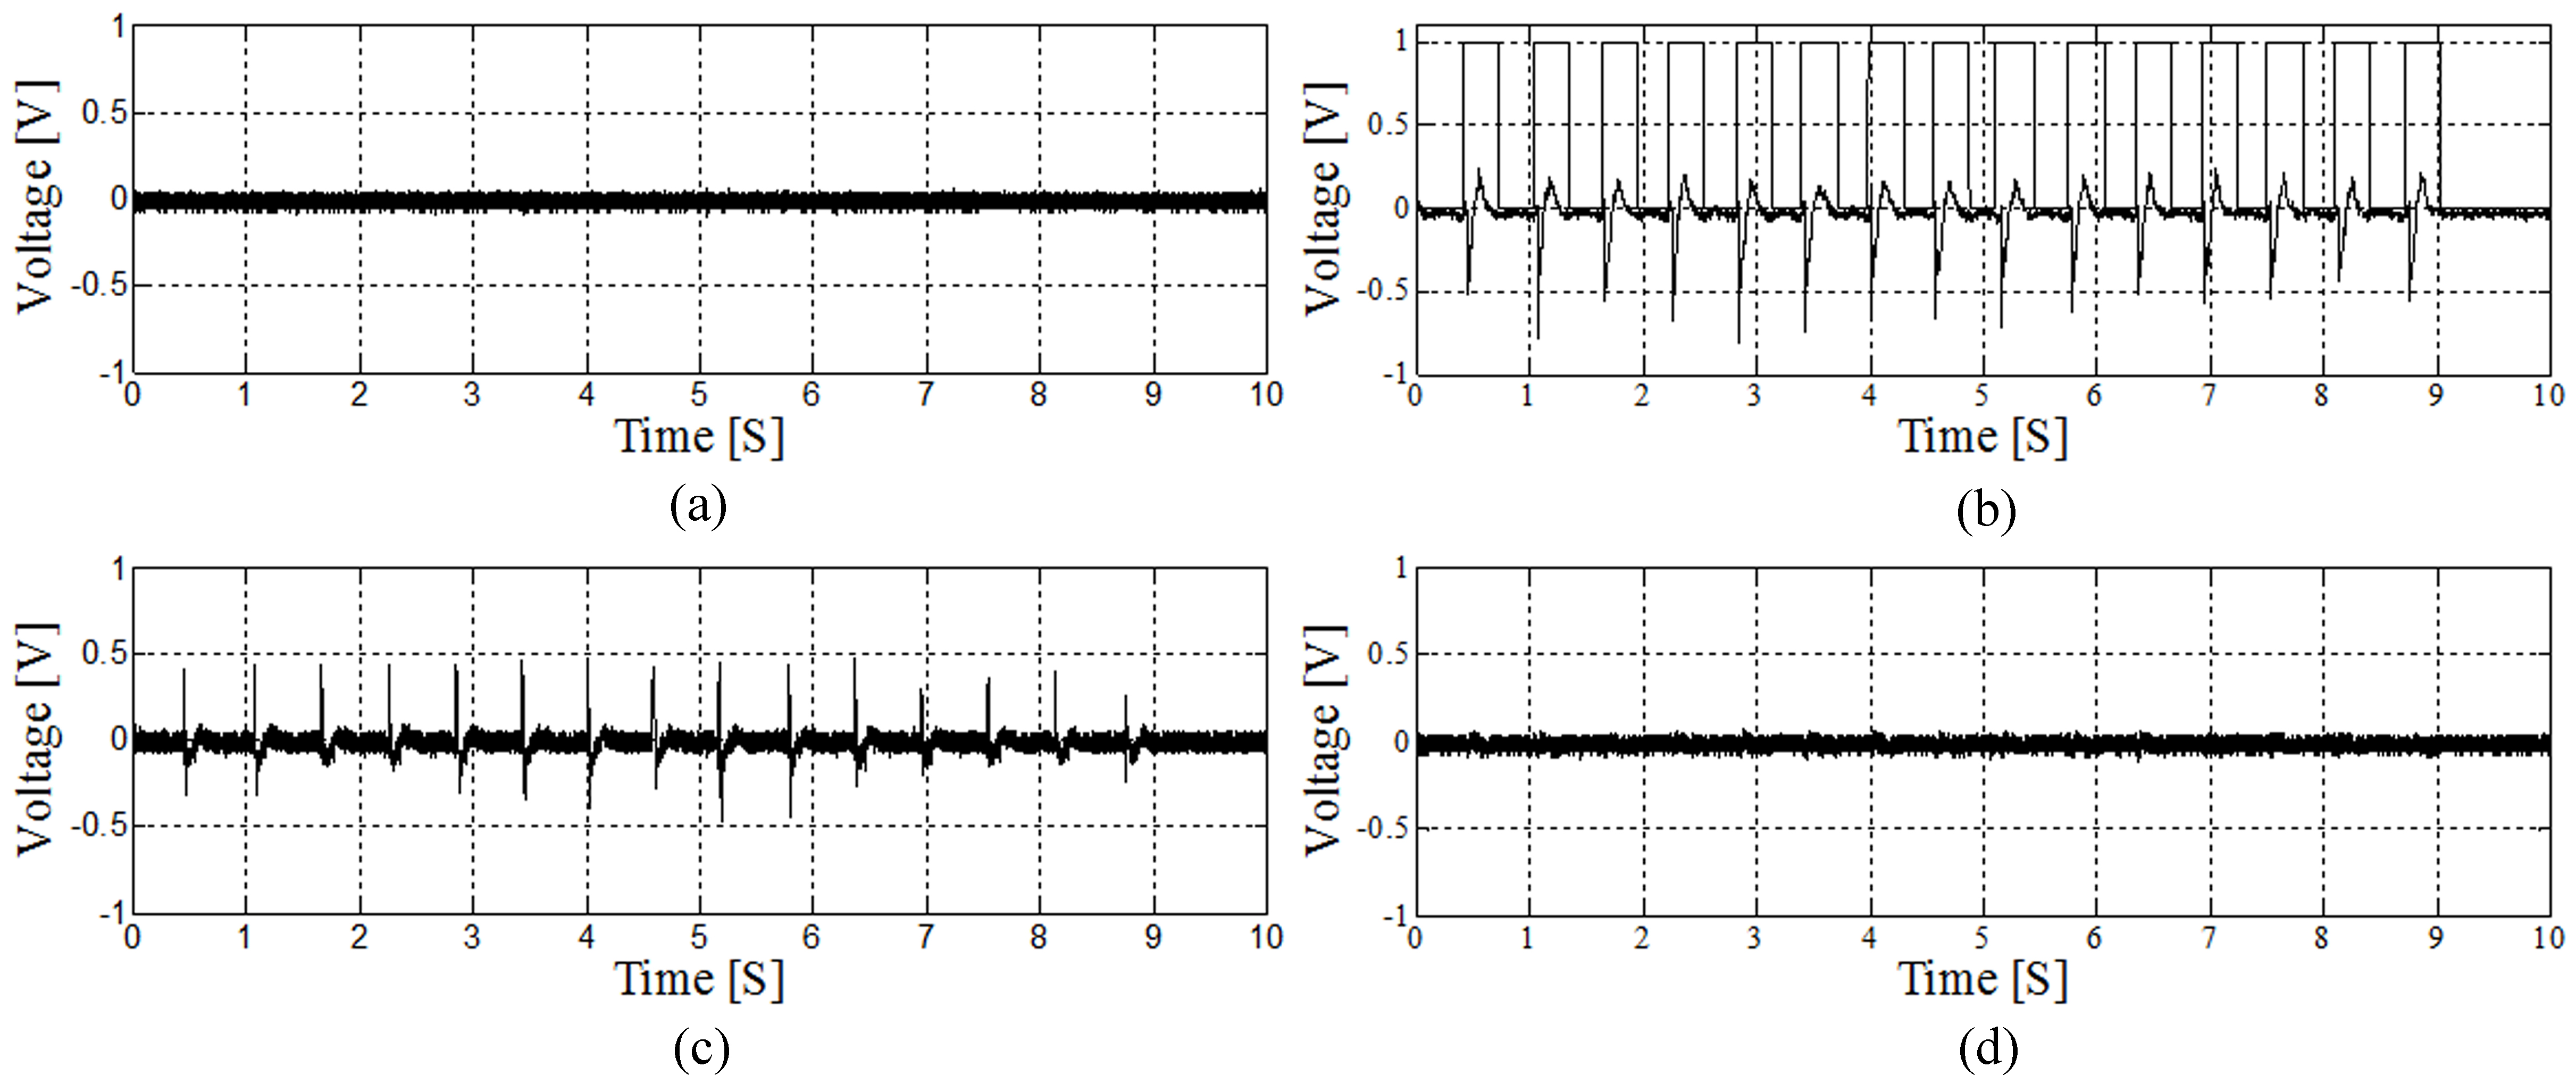 Results of experiment and proposed method: (a) 1 kHz pure- tone at ECM, (b) result with Eq. (1), (c) 1 kHz pure-tone and mastication noise at ECM, and (d) result with proposed method.